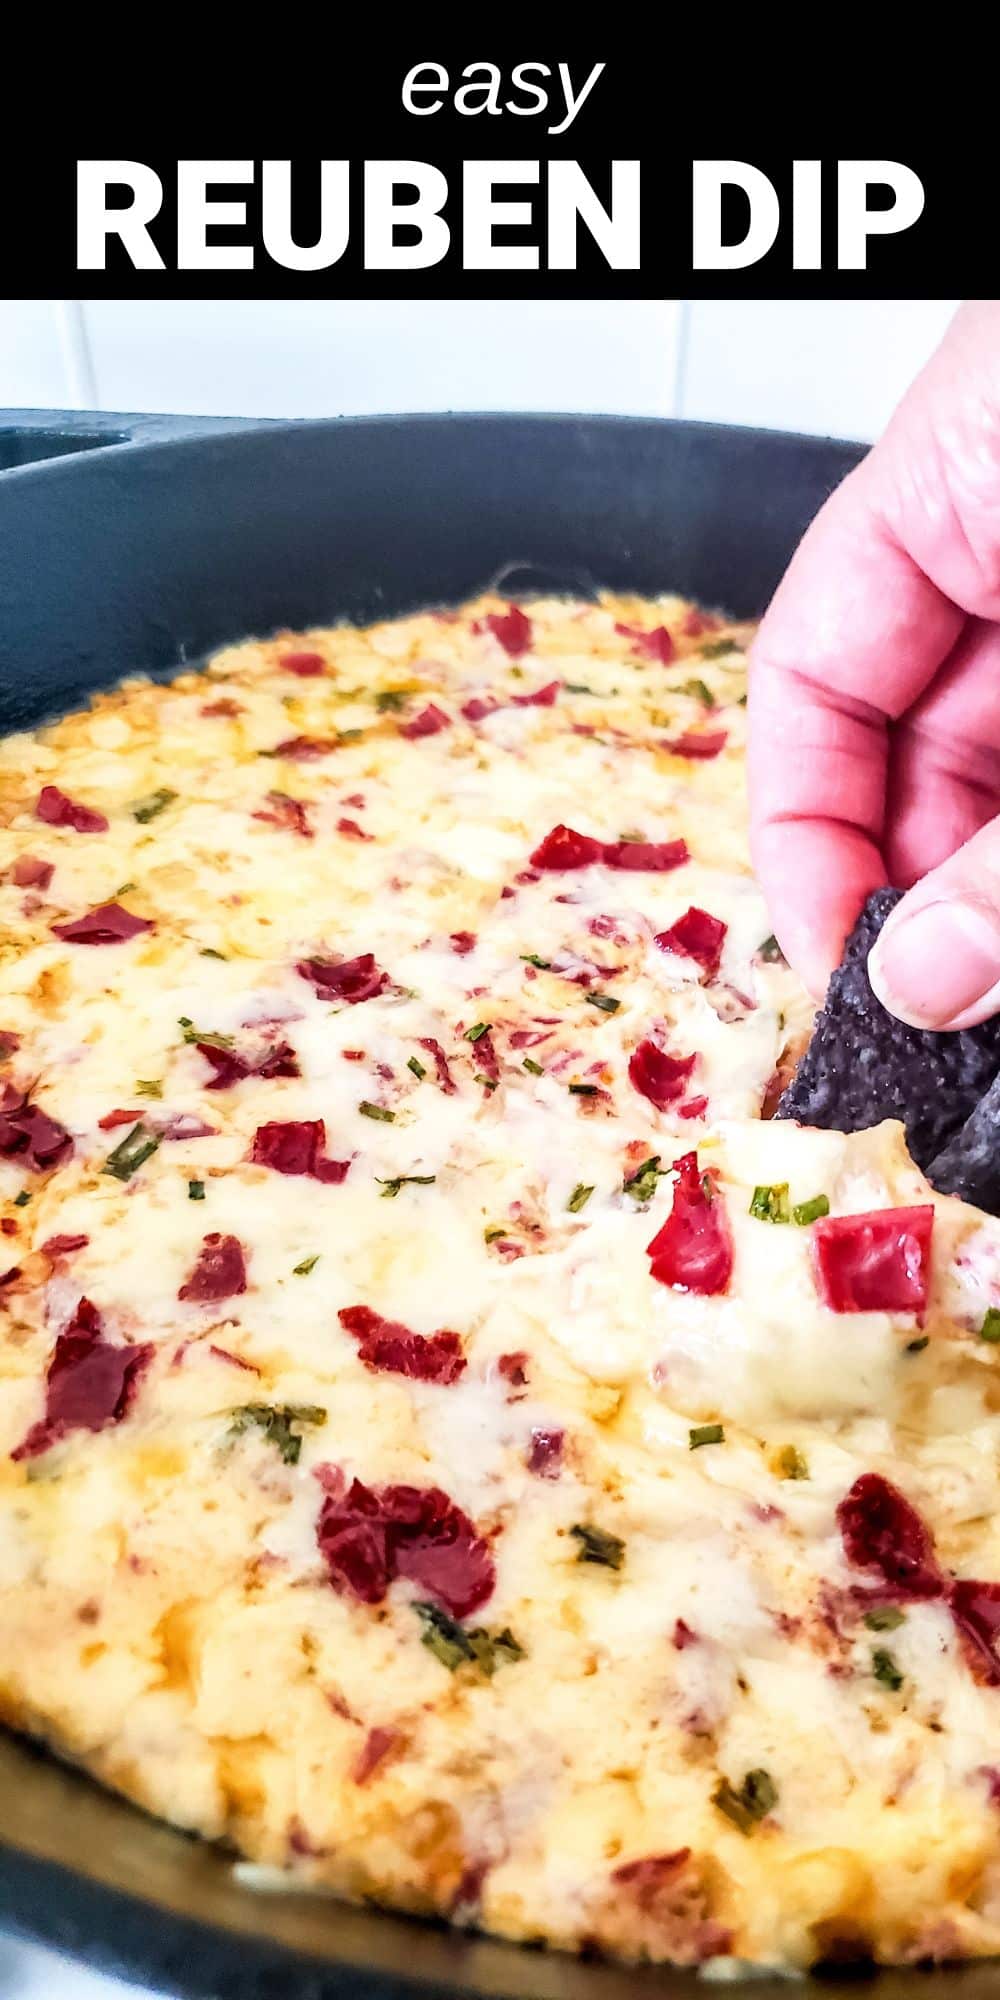 Reuben sandwich lovers will go crazy for this amazing hot Reuben Dip! Loaded with tender corned beef, tangy sauerkraut and Thousand Island dressing, this recipe has all the same wonderful flavors of a classic reuben sandwich, but in the form of a warm, cheesy and delicious dip. 